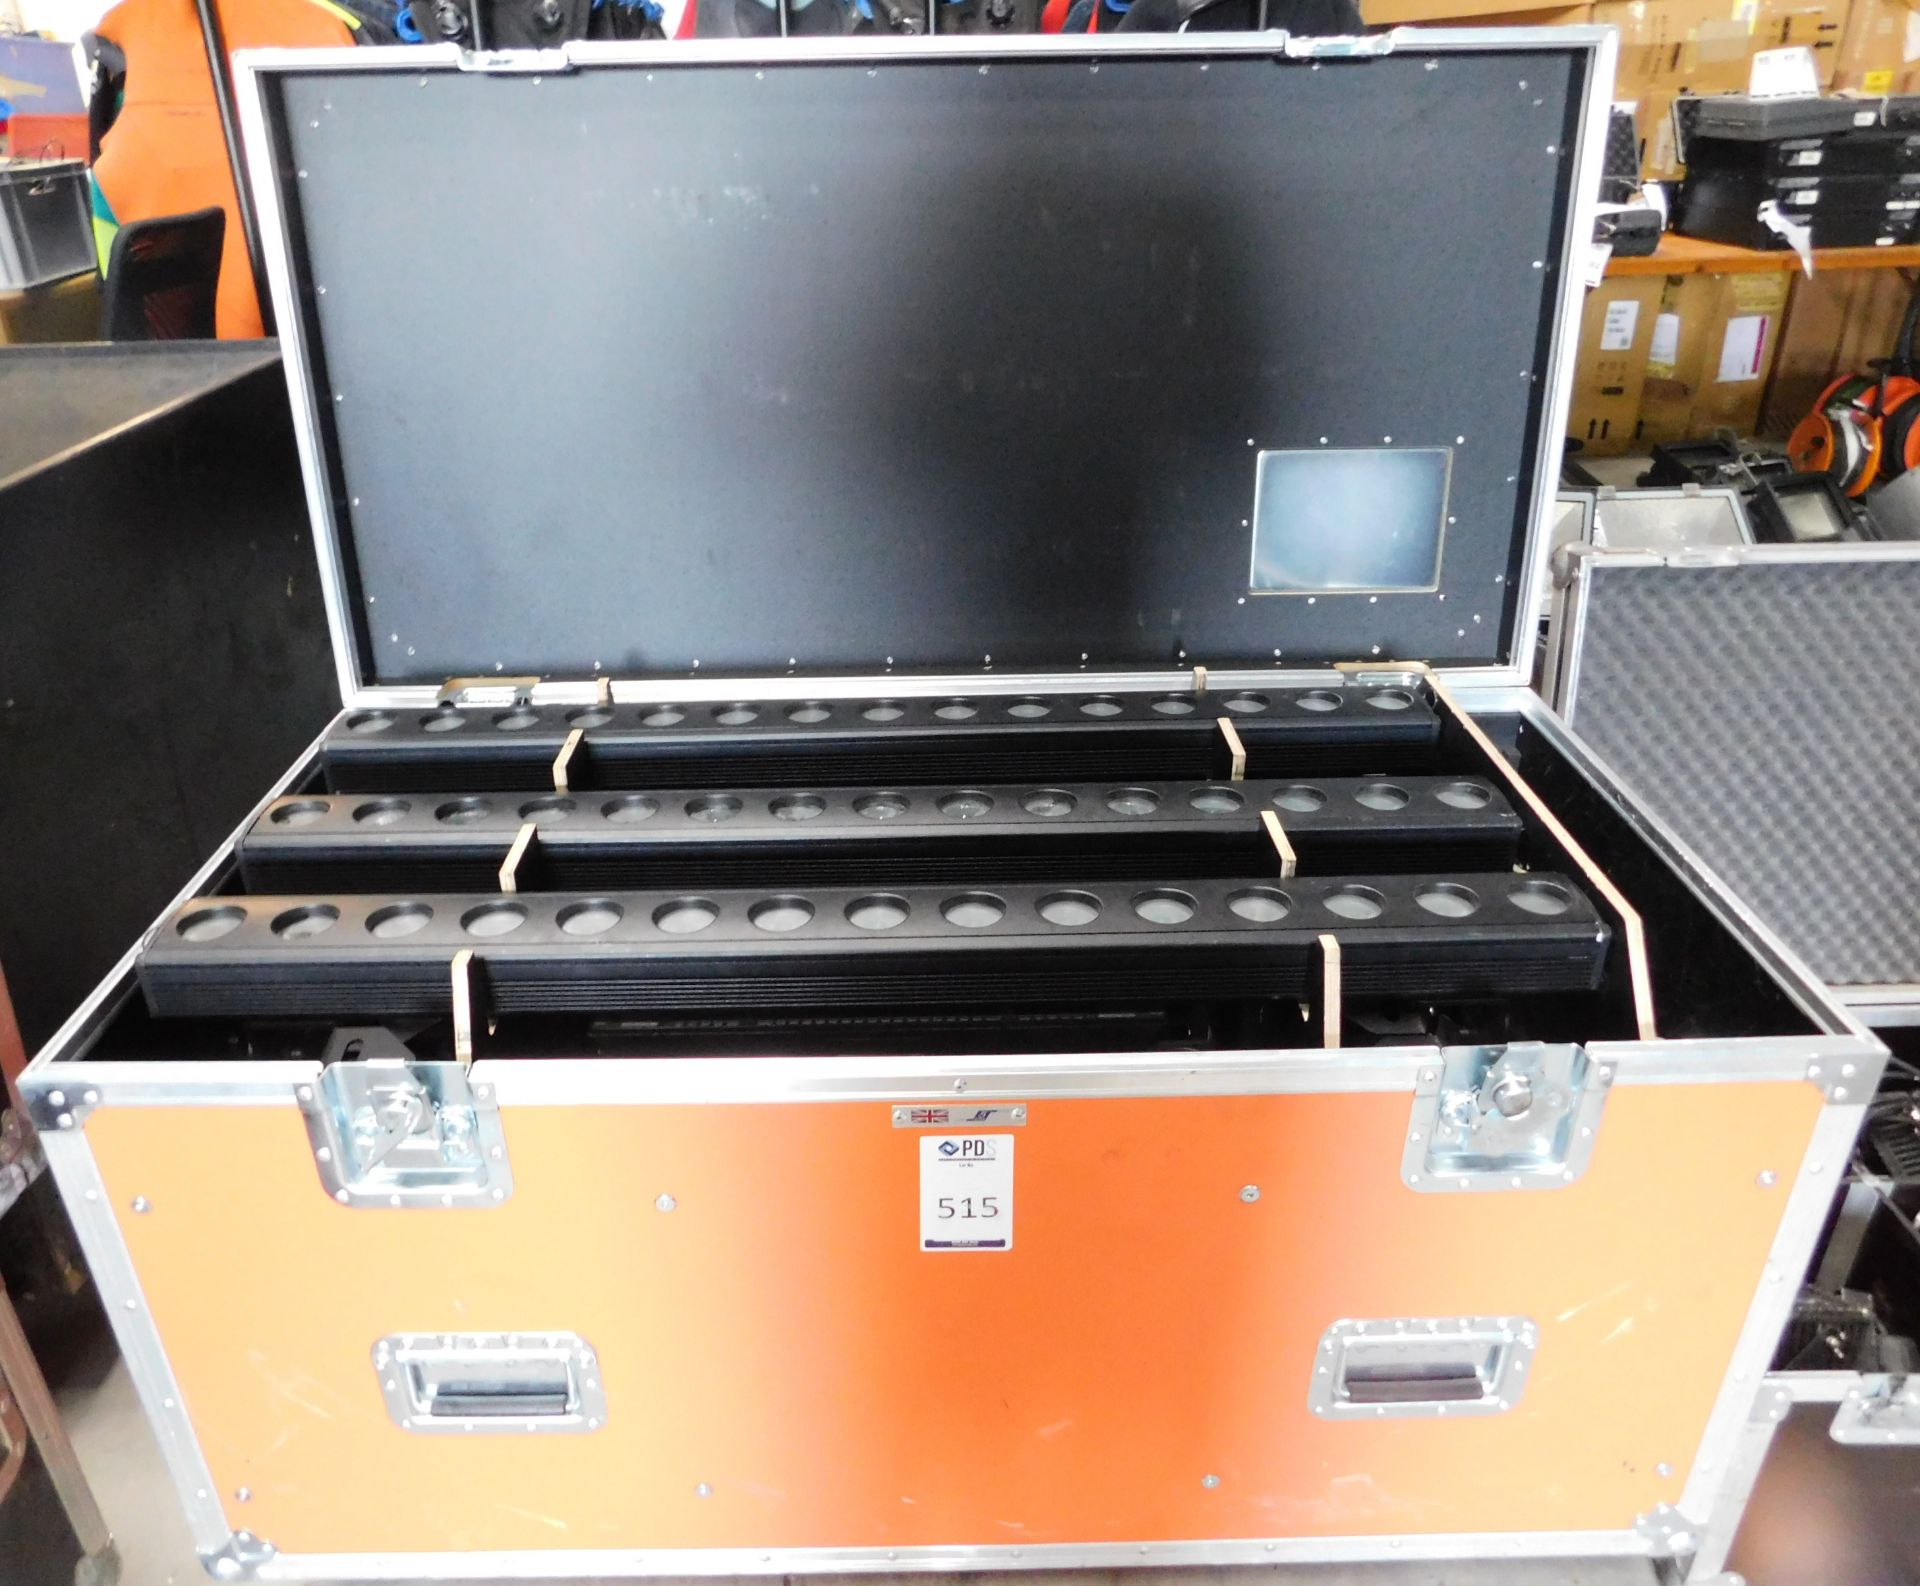 6 Prolights LumiPix 15IPx LED Pixel Battens in Flight Case (Location: Brentwood. Please Refer to